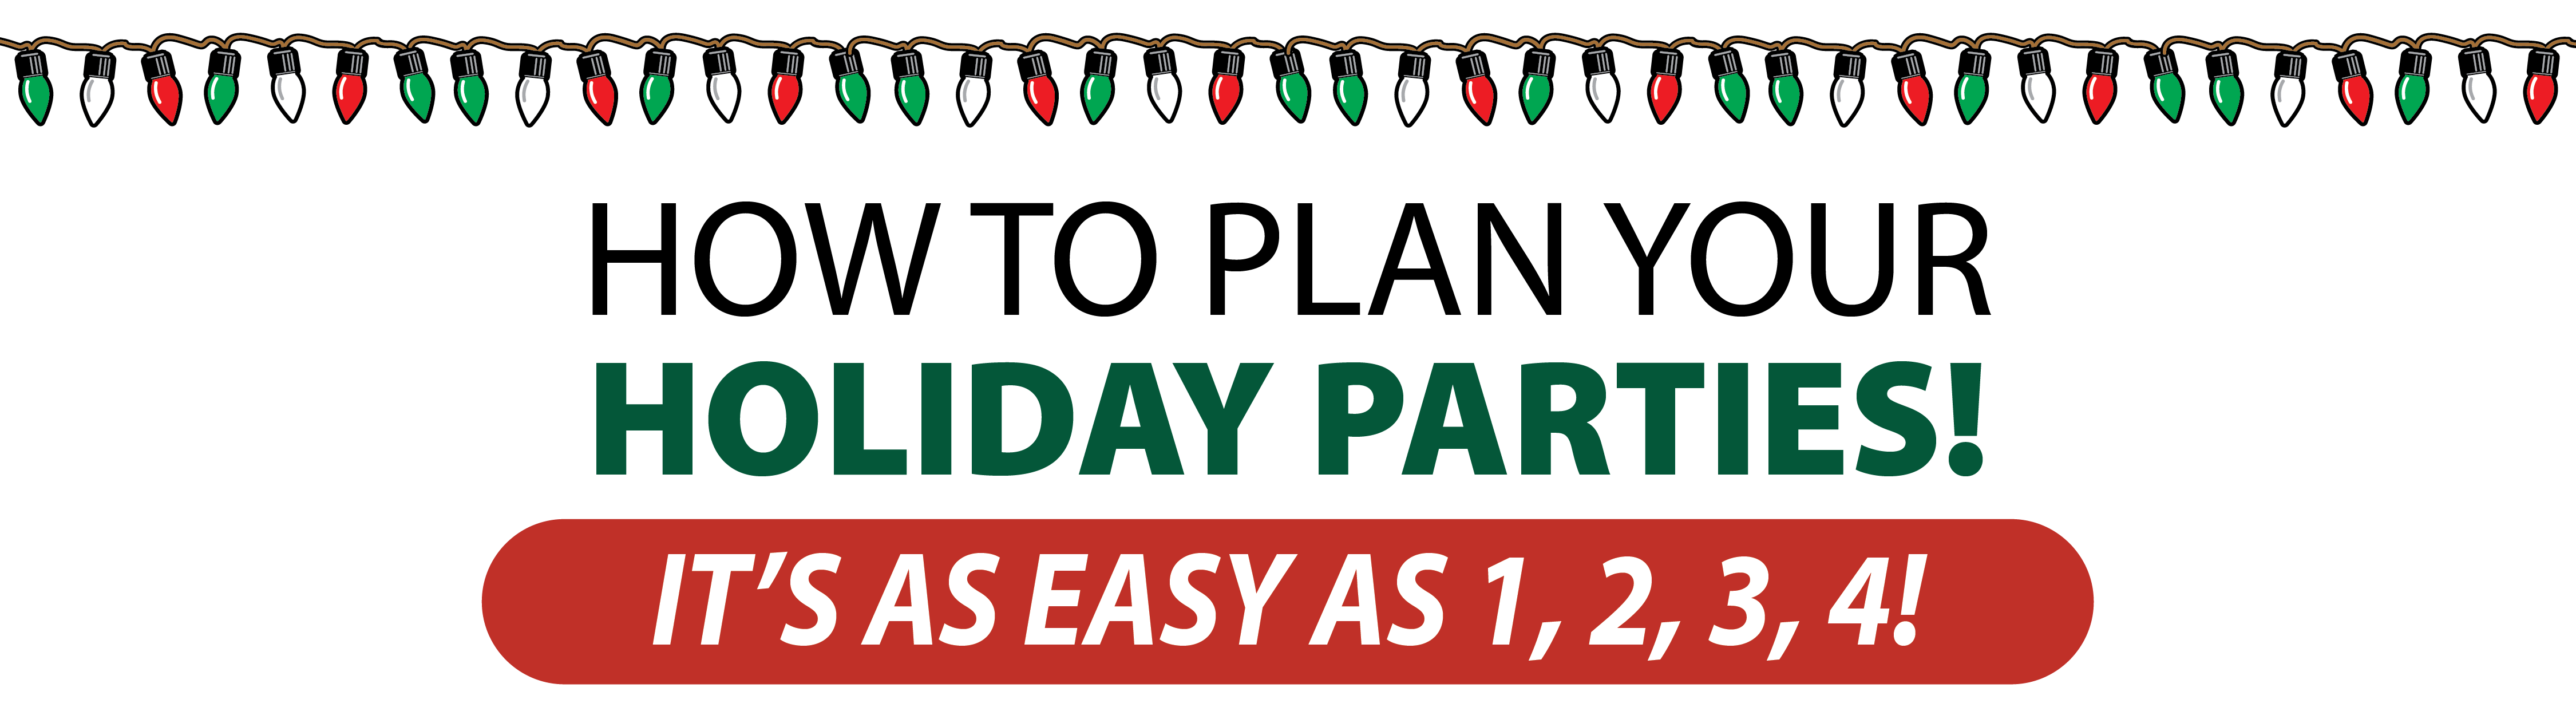 HOW TO PLAN YOUR HOLIDAY PARTIES!